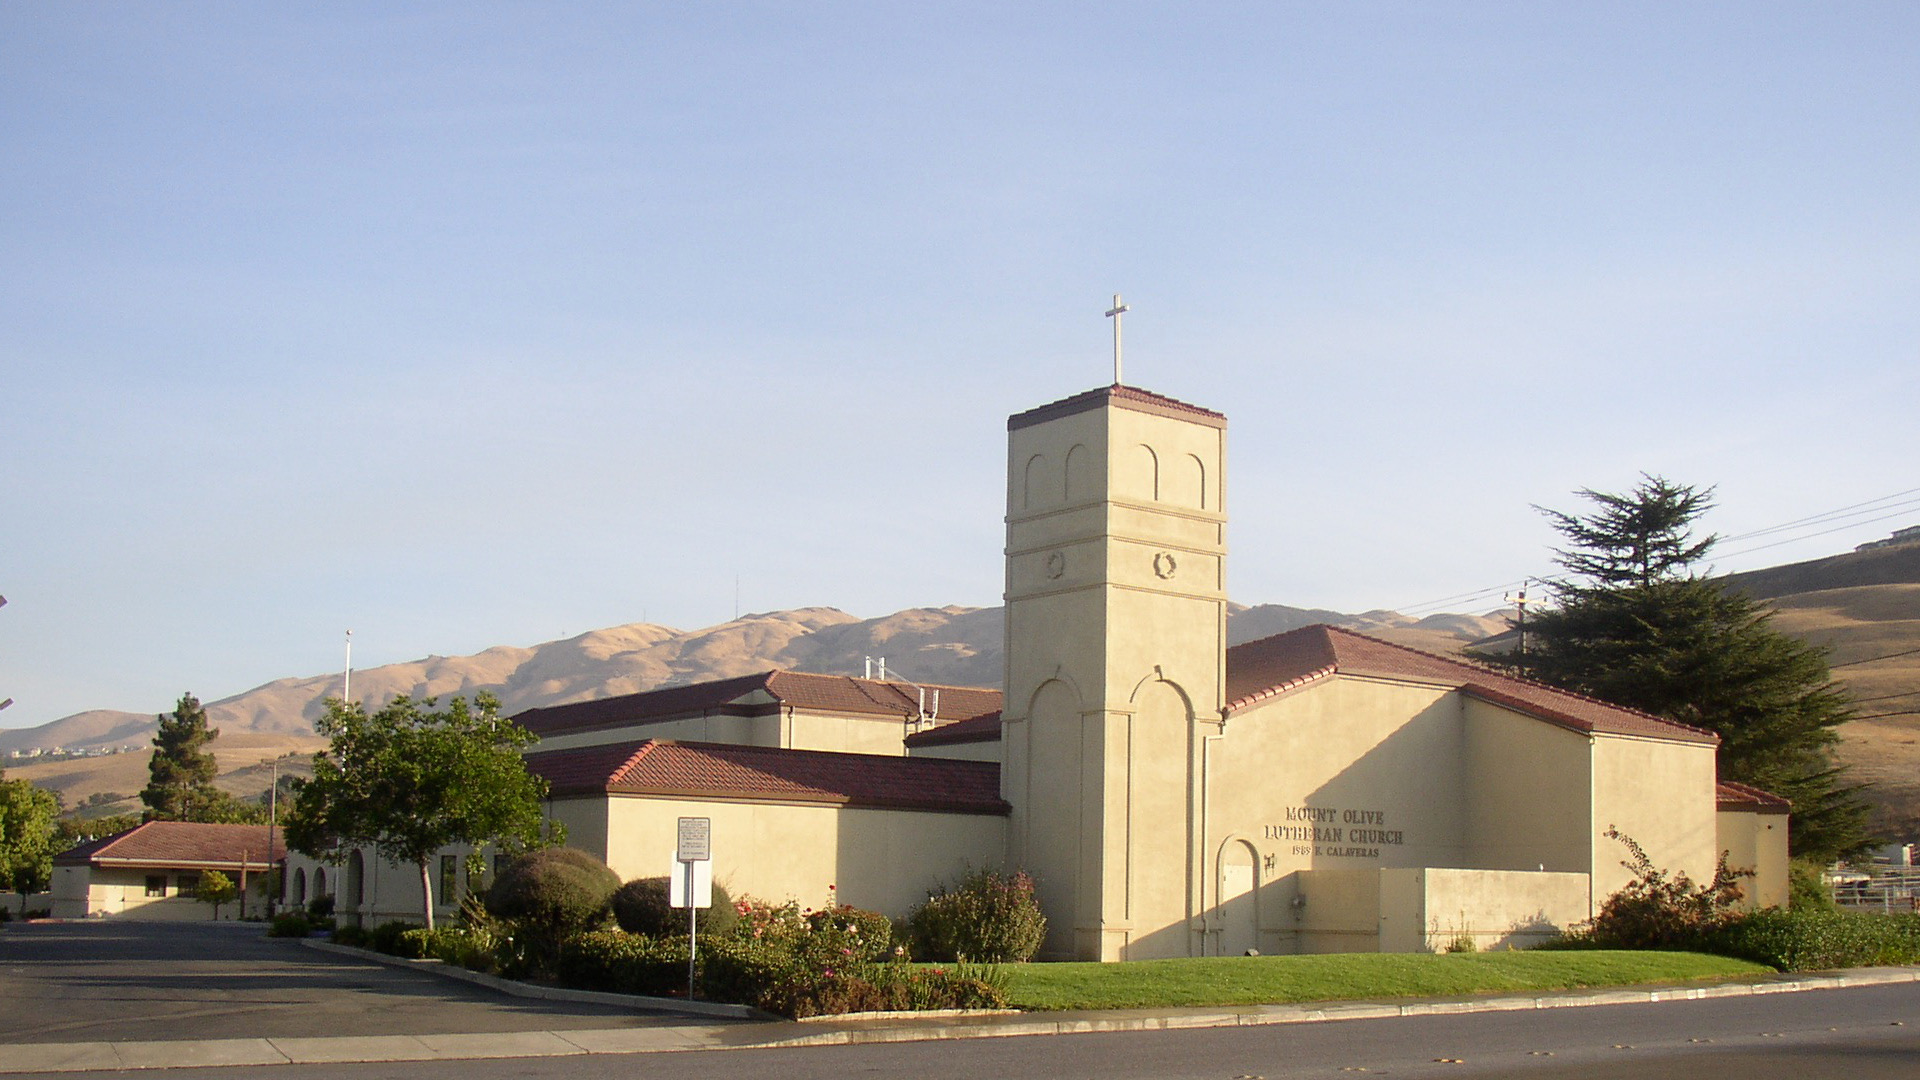 Mount Olive Ministries - a Christian church in Milpitas, CA